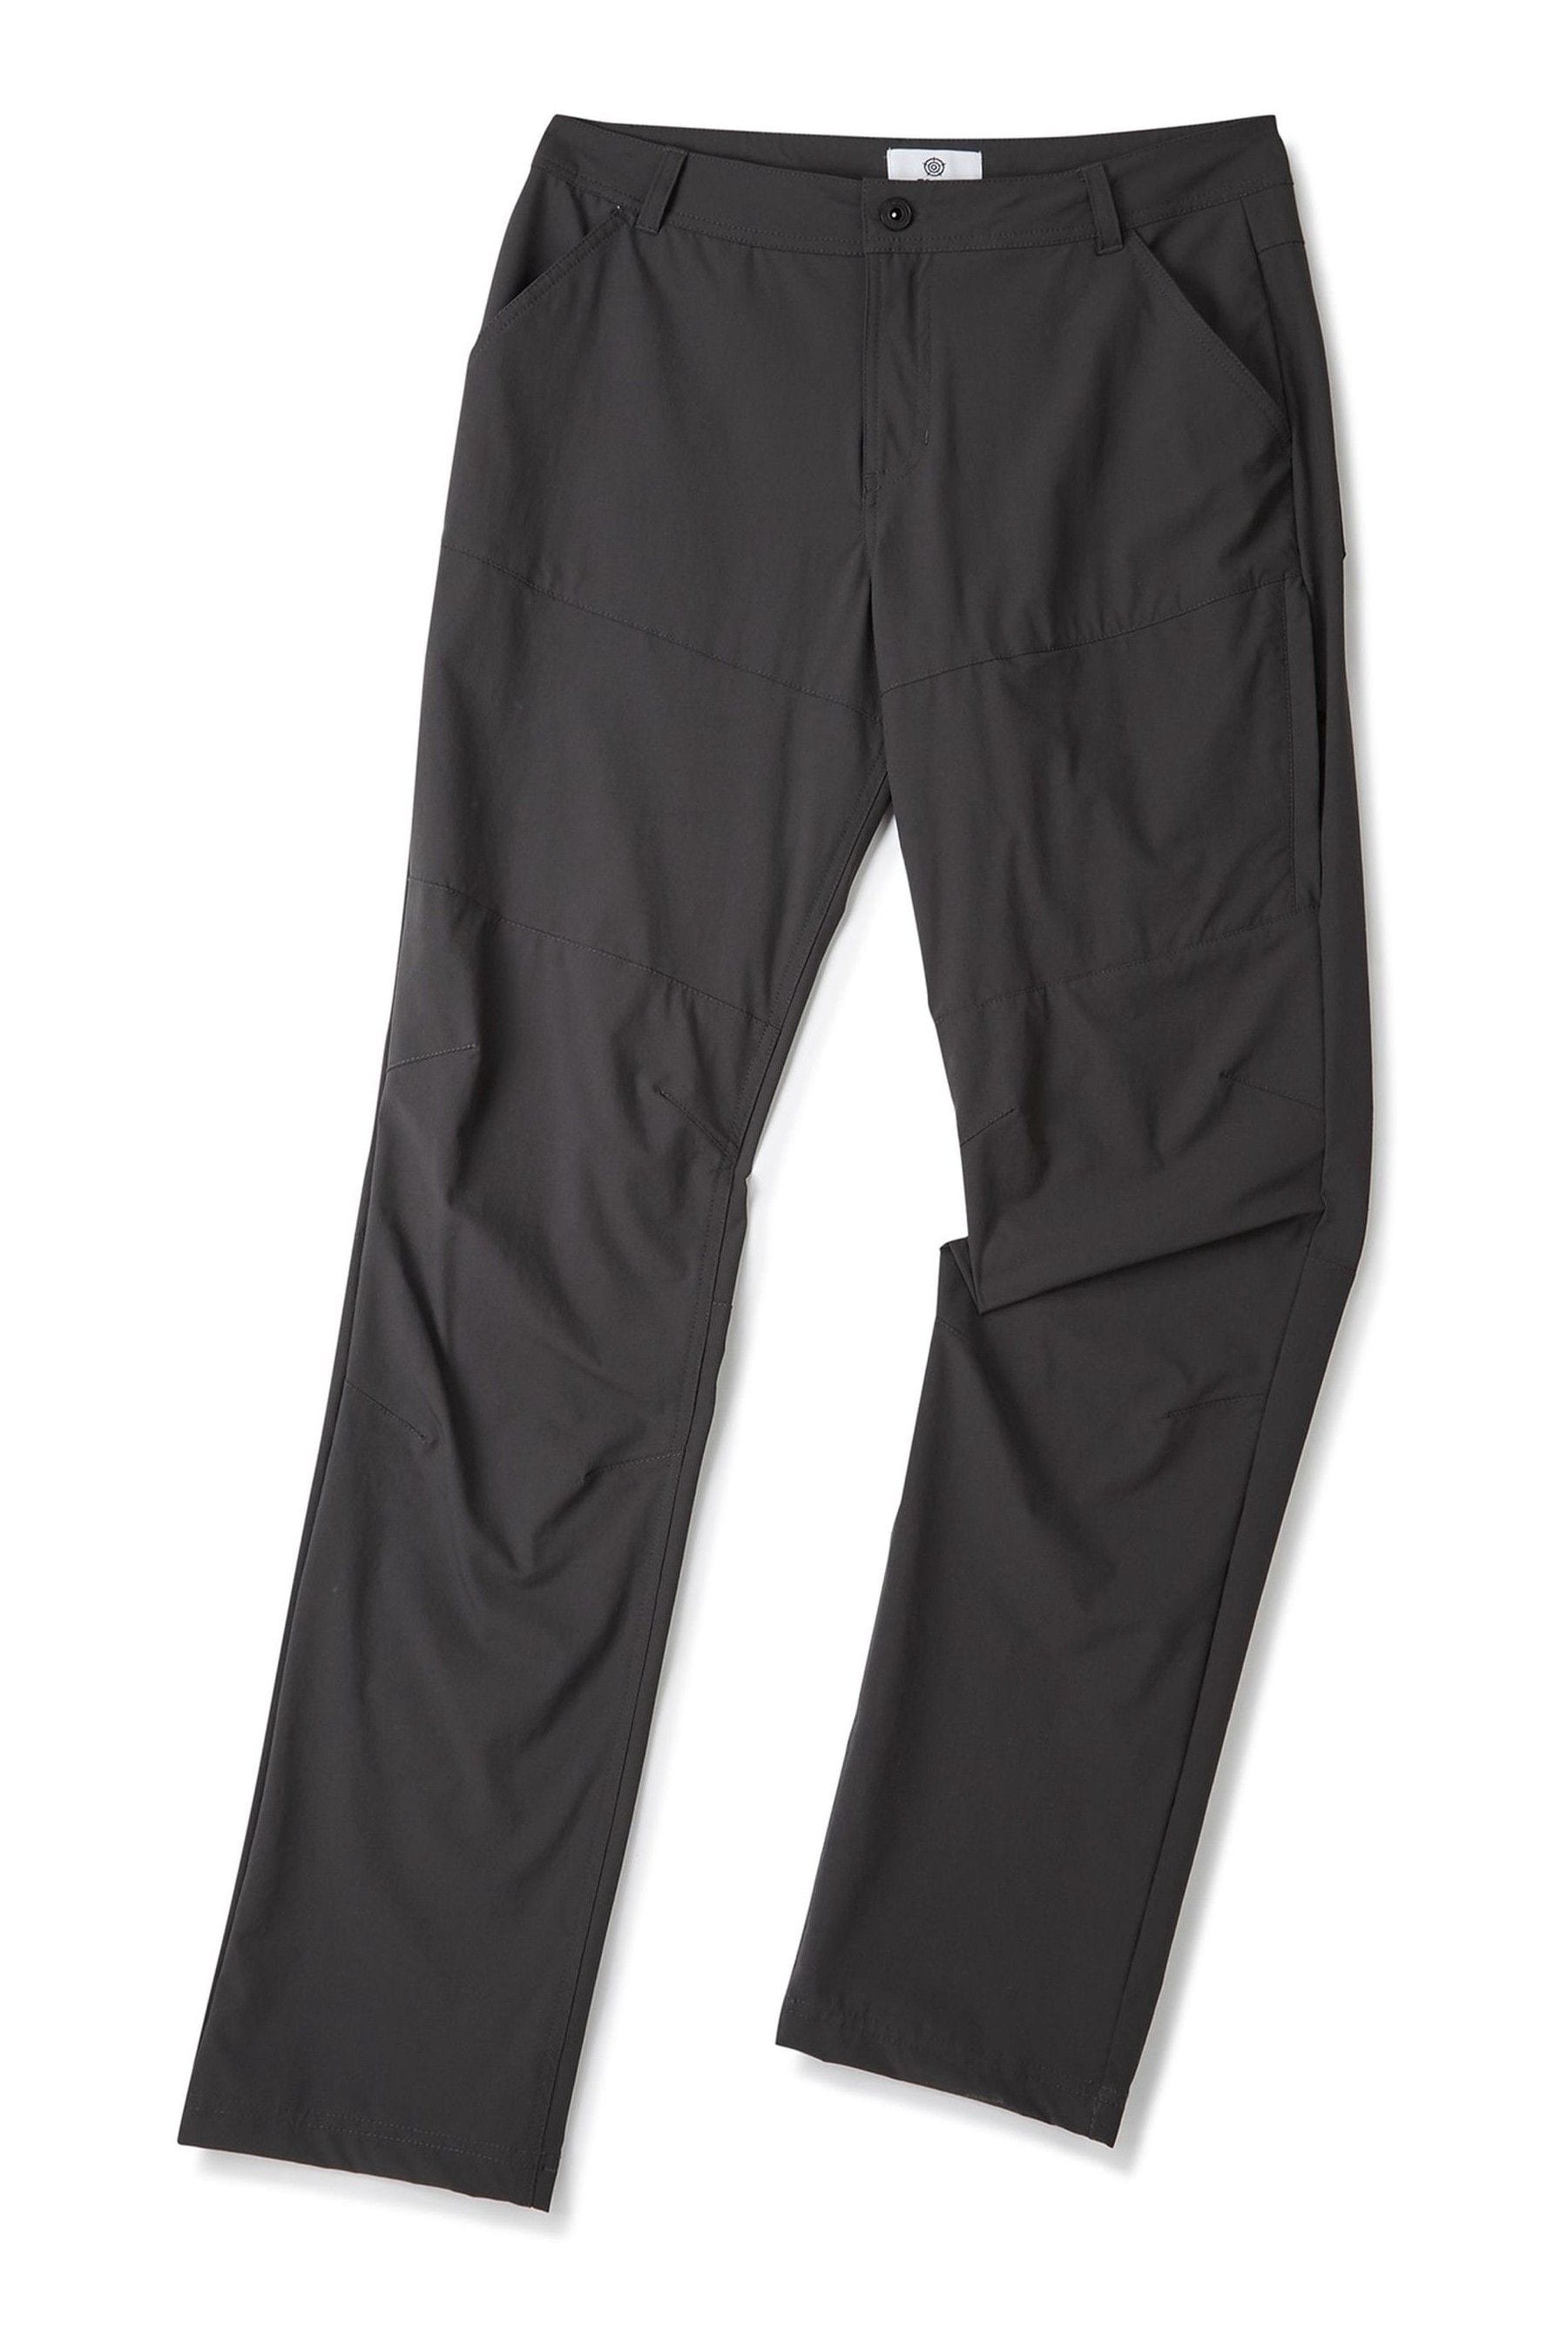 Buy Tog 24 Black/Blue Denver Tech Walking Long Trousers from the Next ...